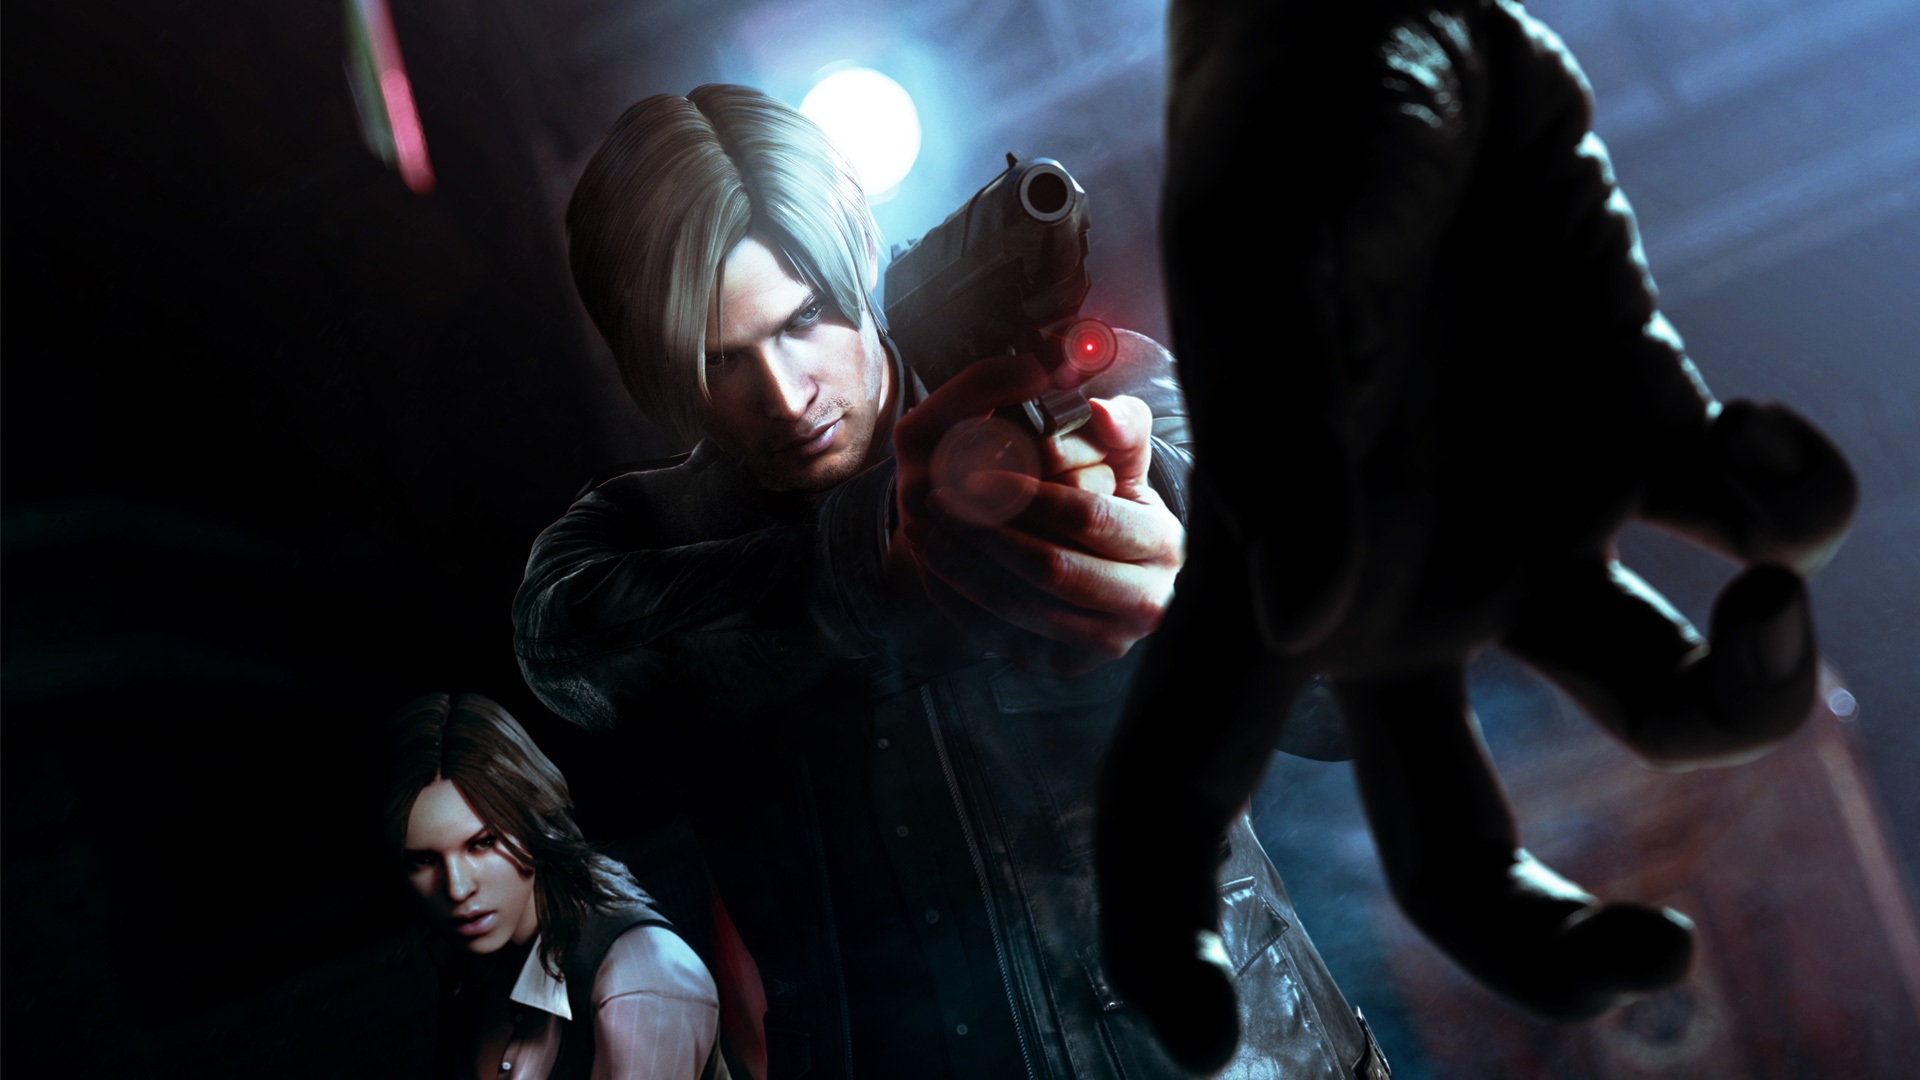 Resident Evil 6 HD game wallpapers #13 - 1920x1080